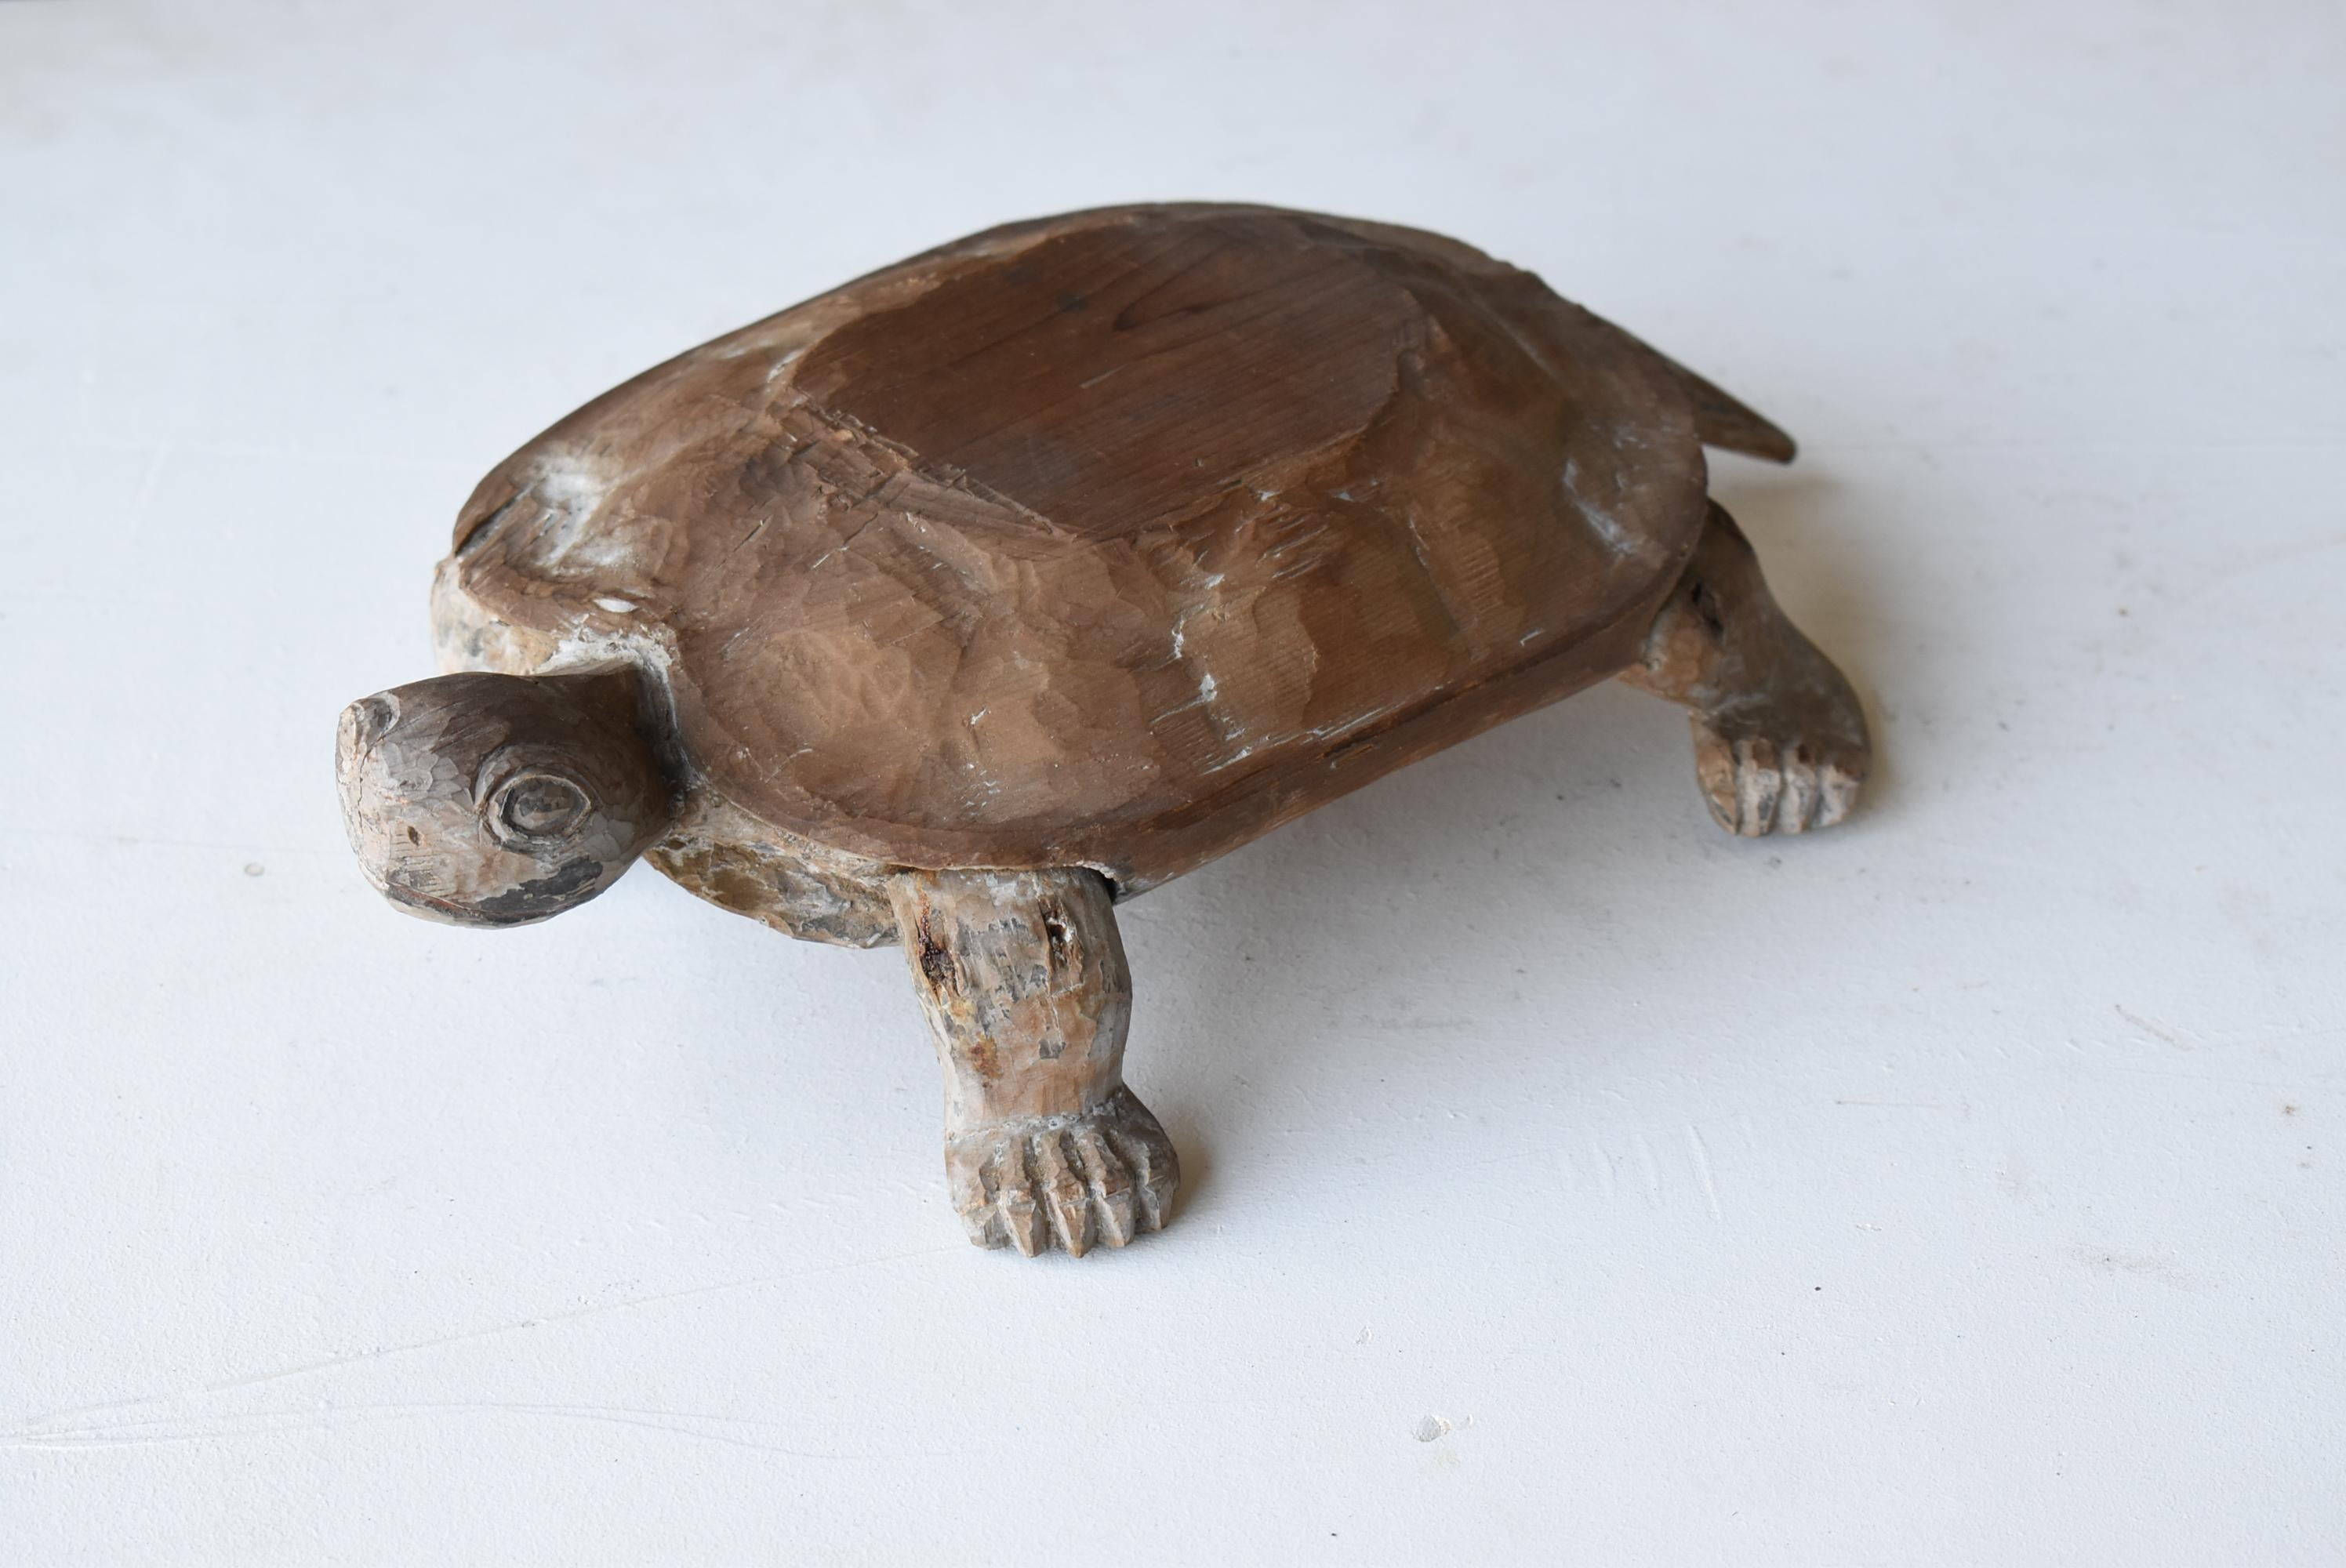 This is a very old Japanese carved wooden turtle.
This item is from the Edo period (1800s-1860s).
It is made of cedar wood.
Very rare item.

Turtles have been considered a good luck charm in Japan since ancient times.
It is like a guardian god of